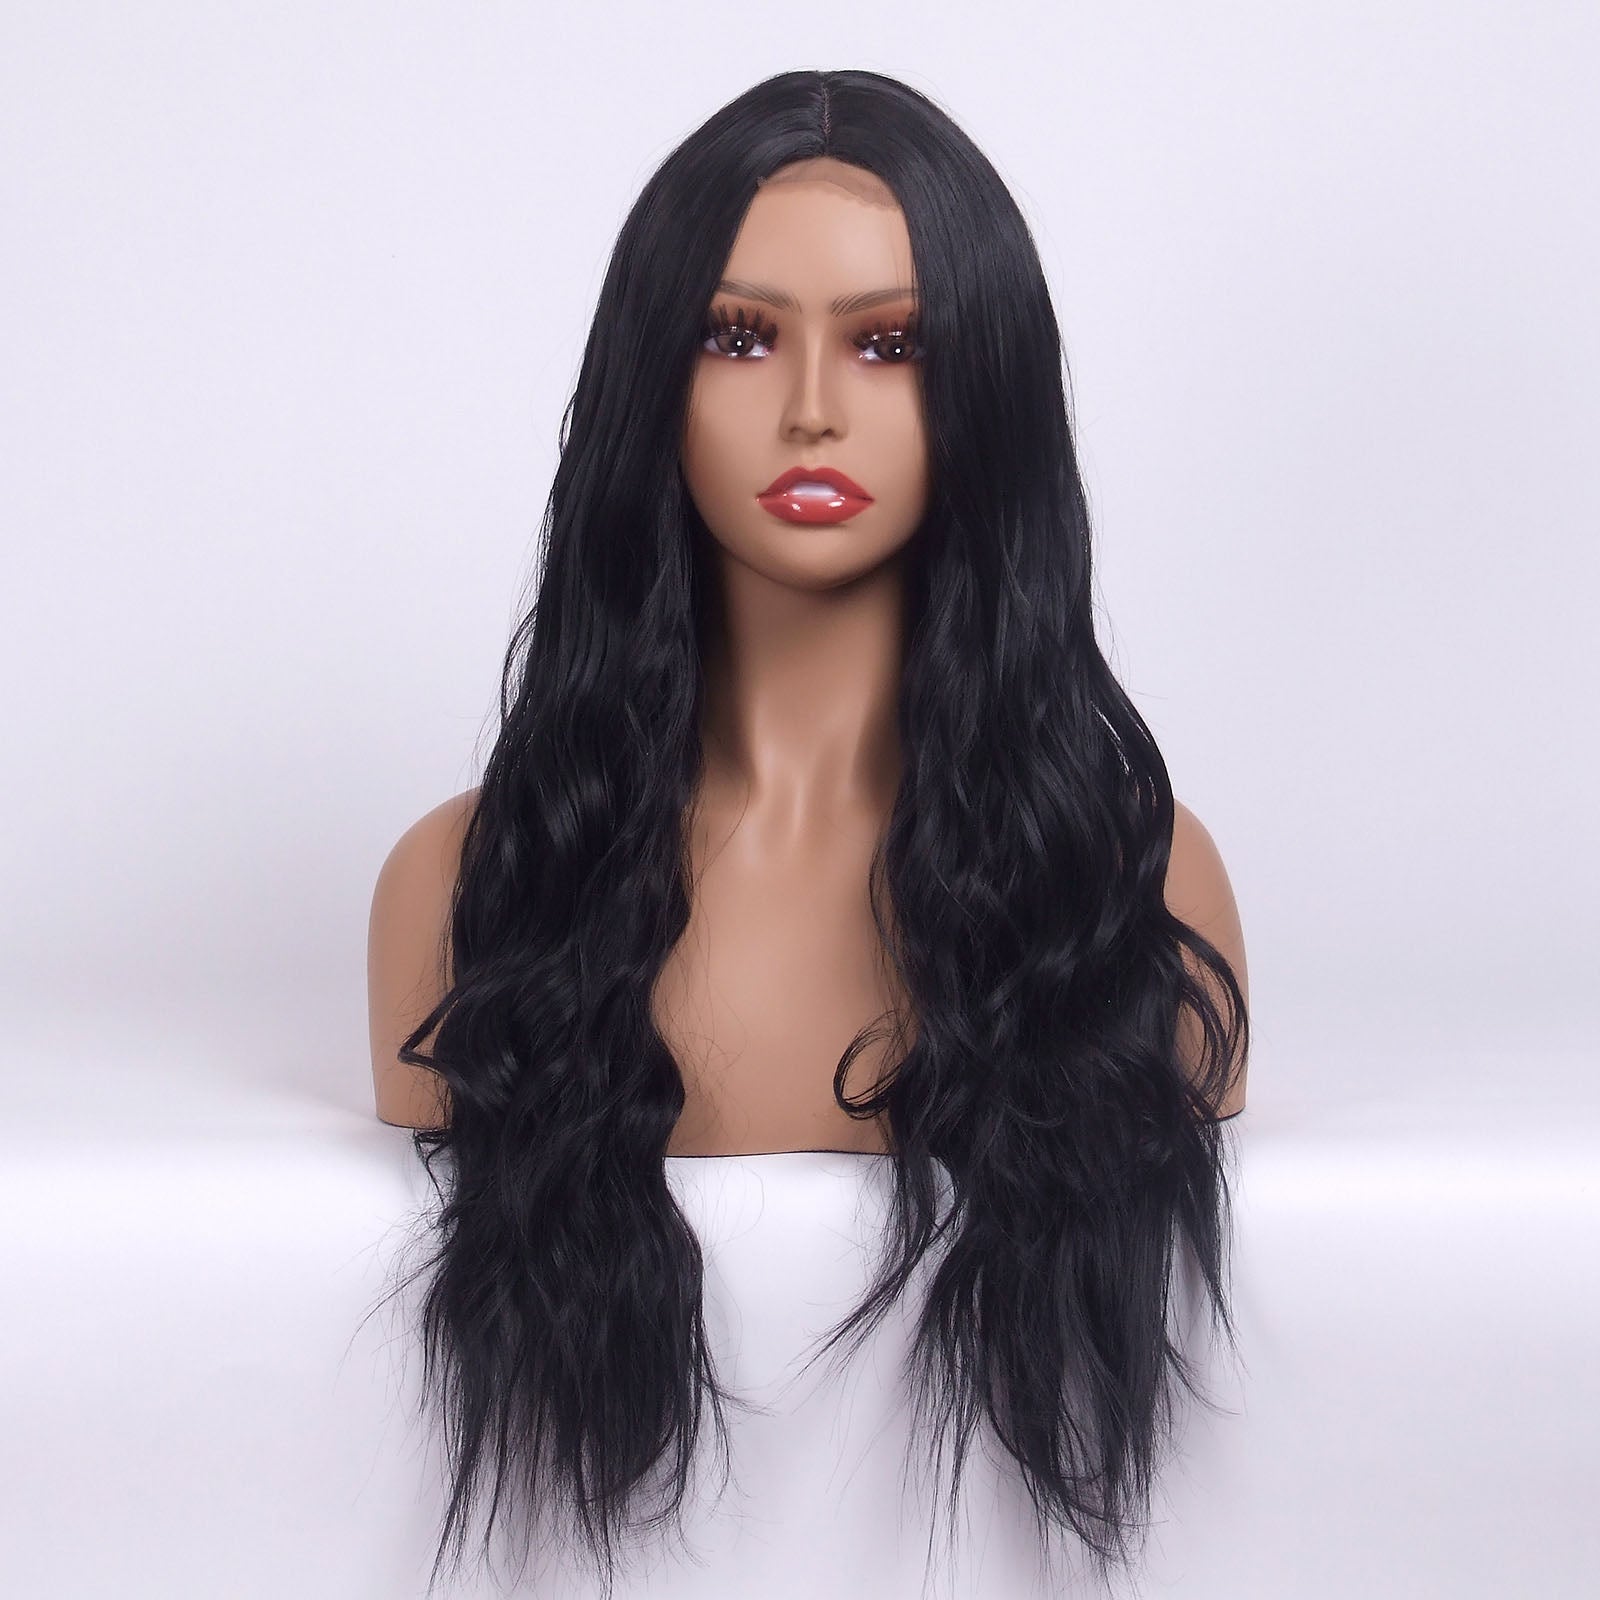 LINGDORA Long Black Wavy Middle Part Wig for Women Fashion Curly Hair Small Lace Front